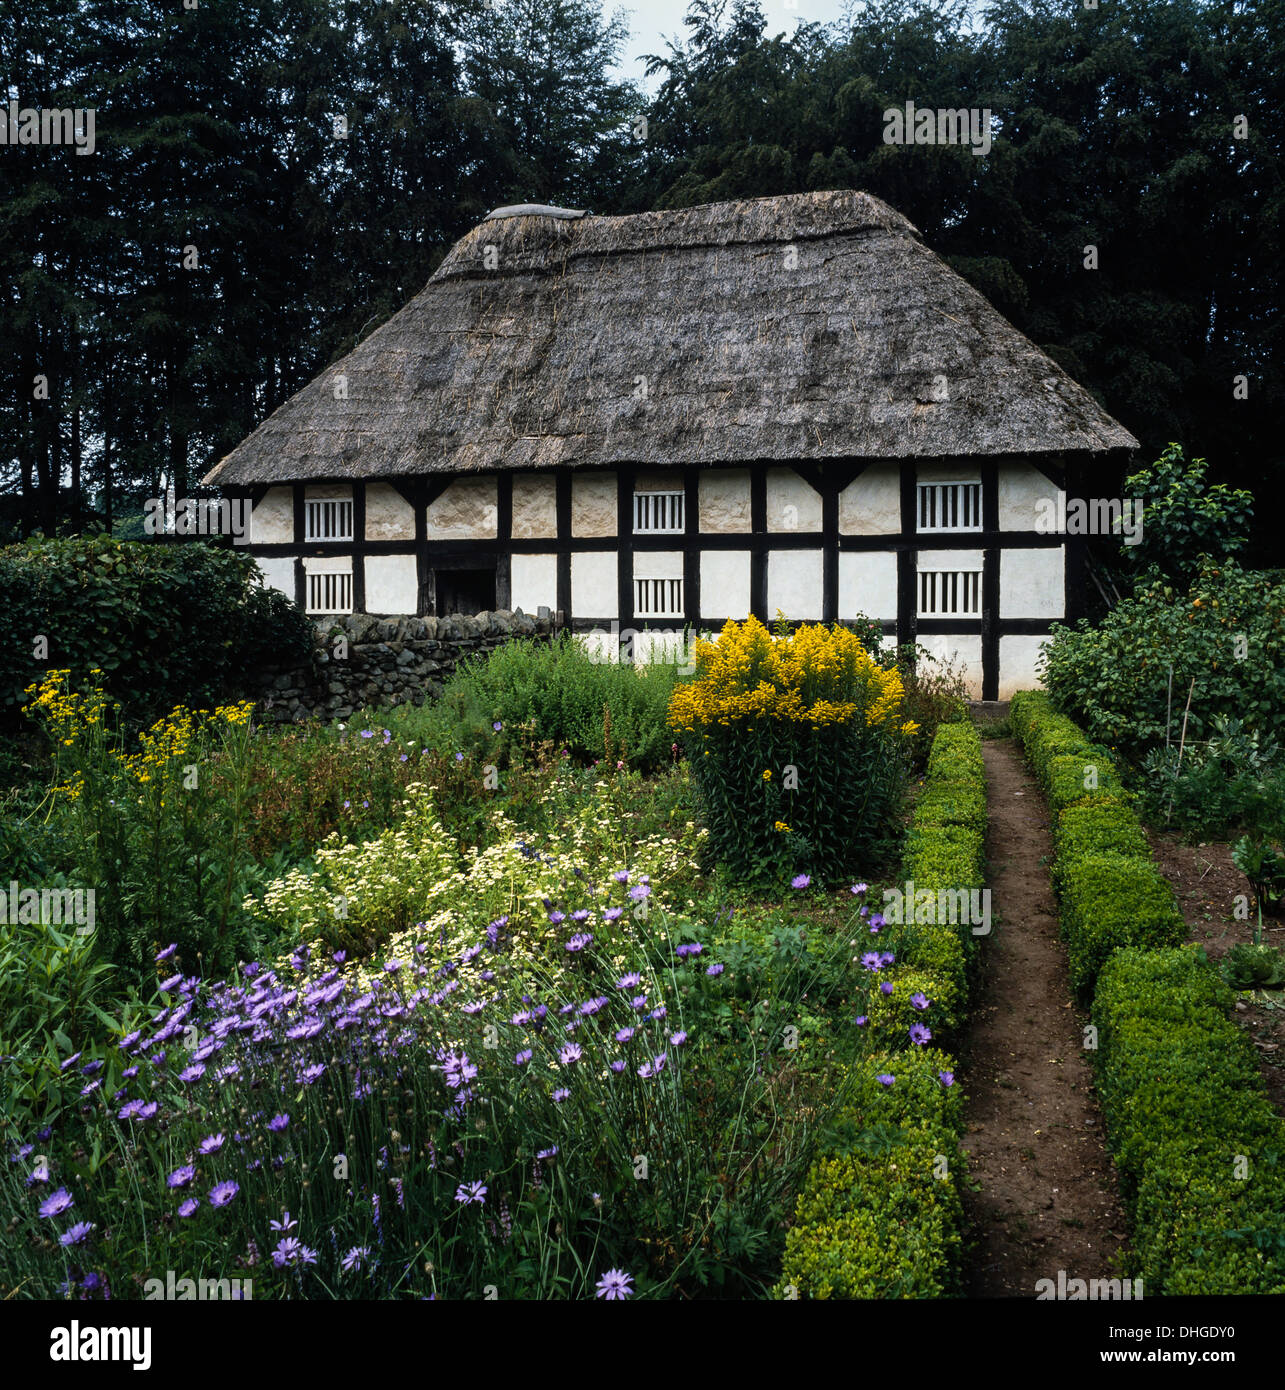 Abernodwydd farmhouse set in the grounds of the St Fagans National Museum of History, Cardiff, Wales, UK Stock Photo